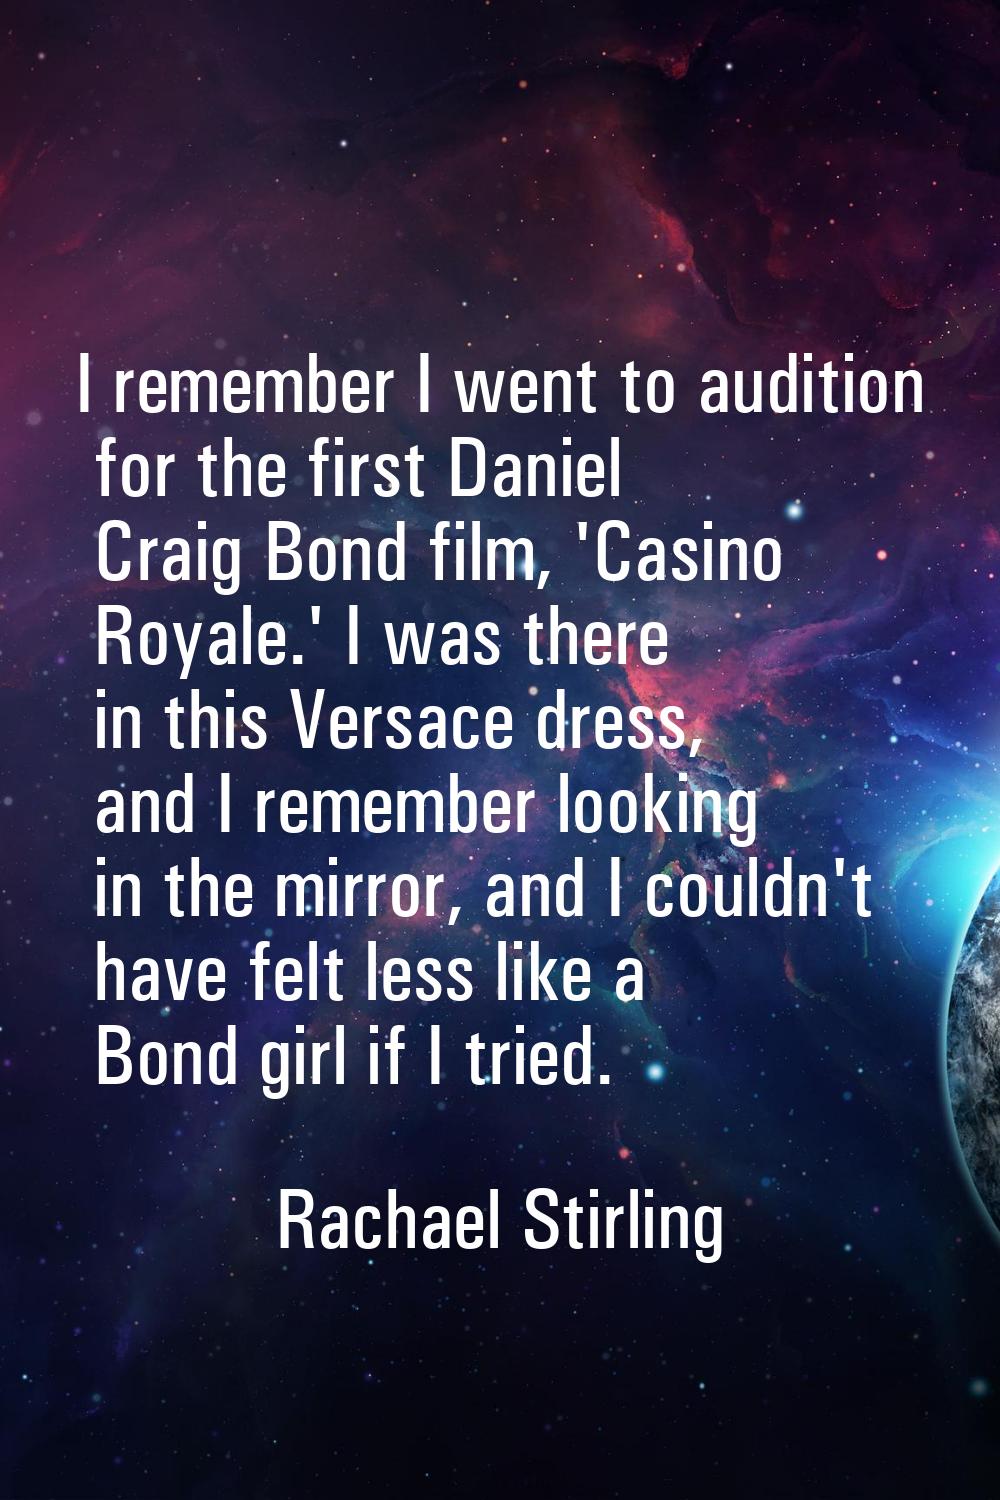 I remember I went to audition for the first Daniel Craig Bond film, 'Casino Royale.' I was there in